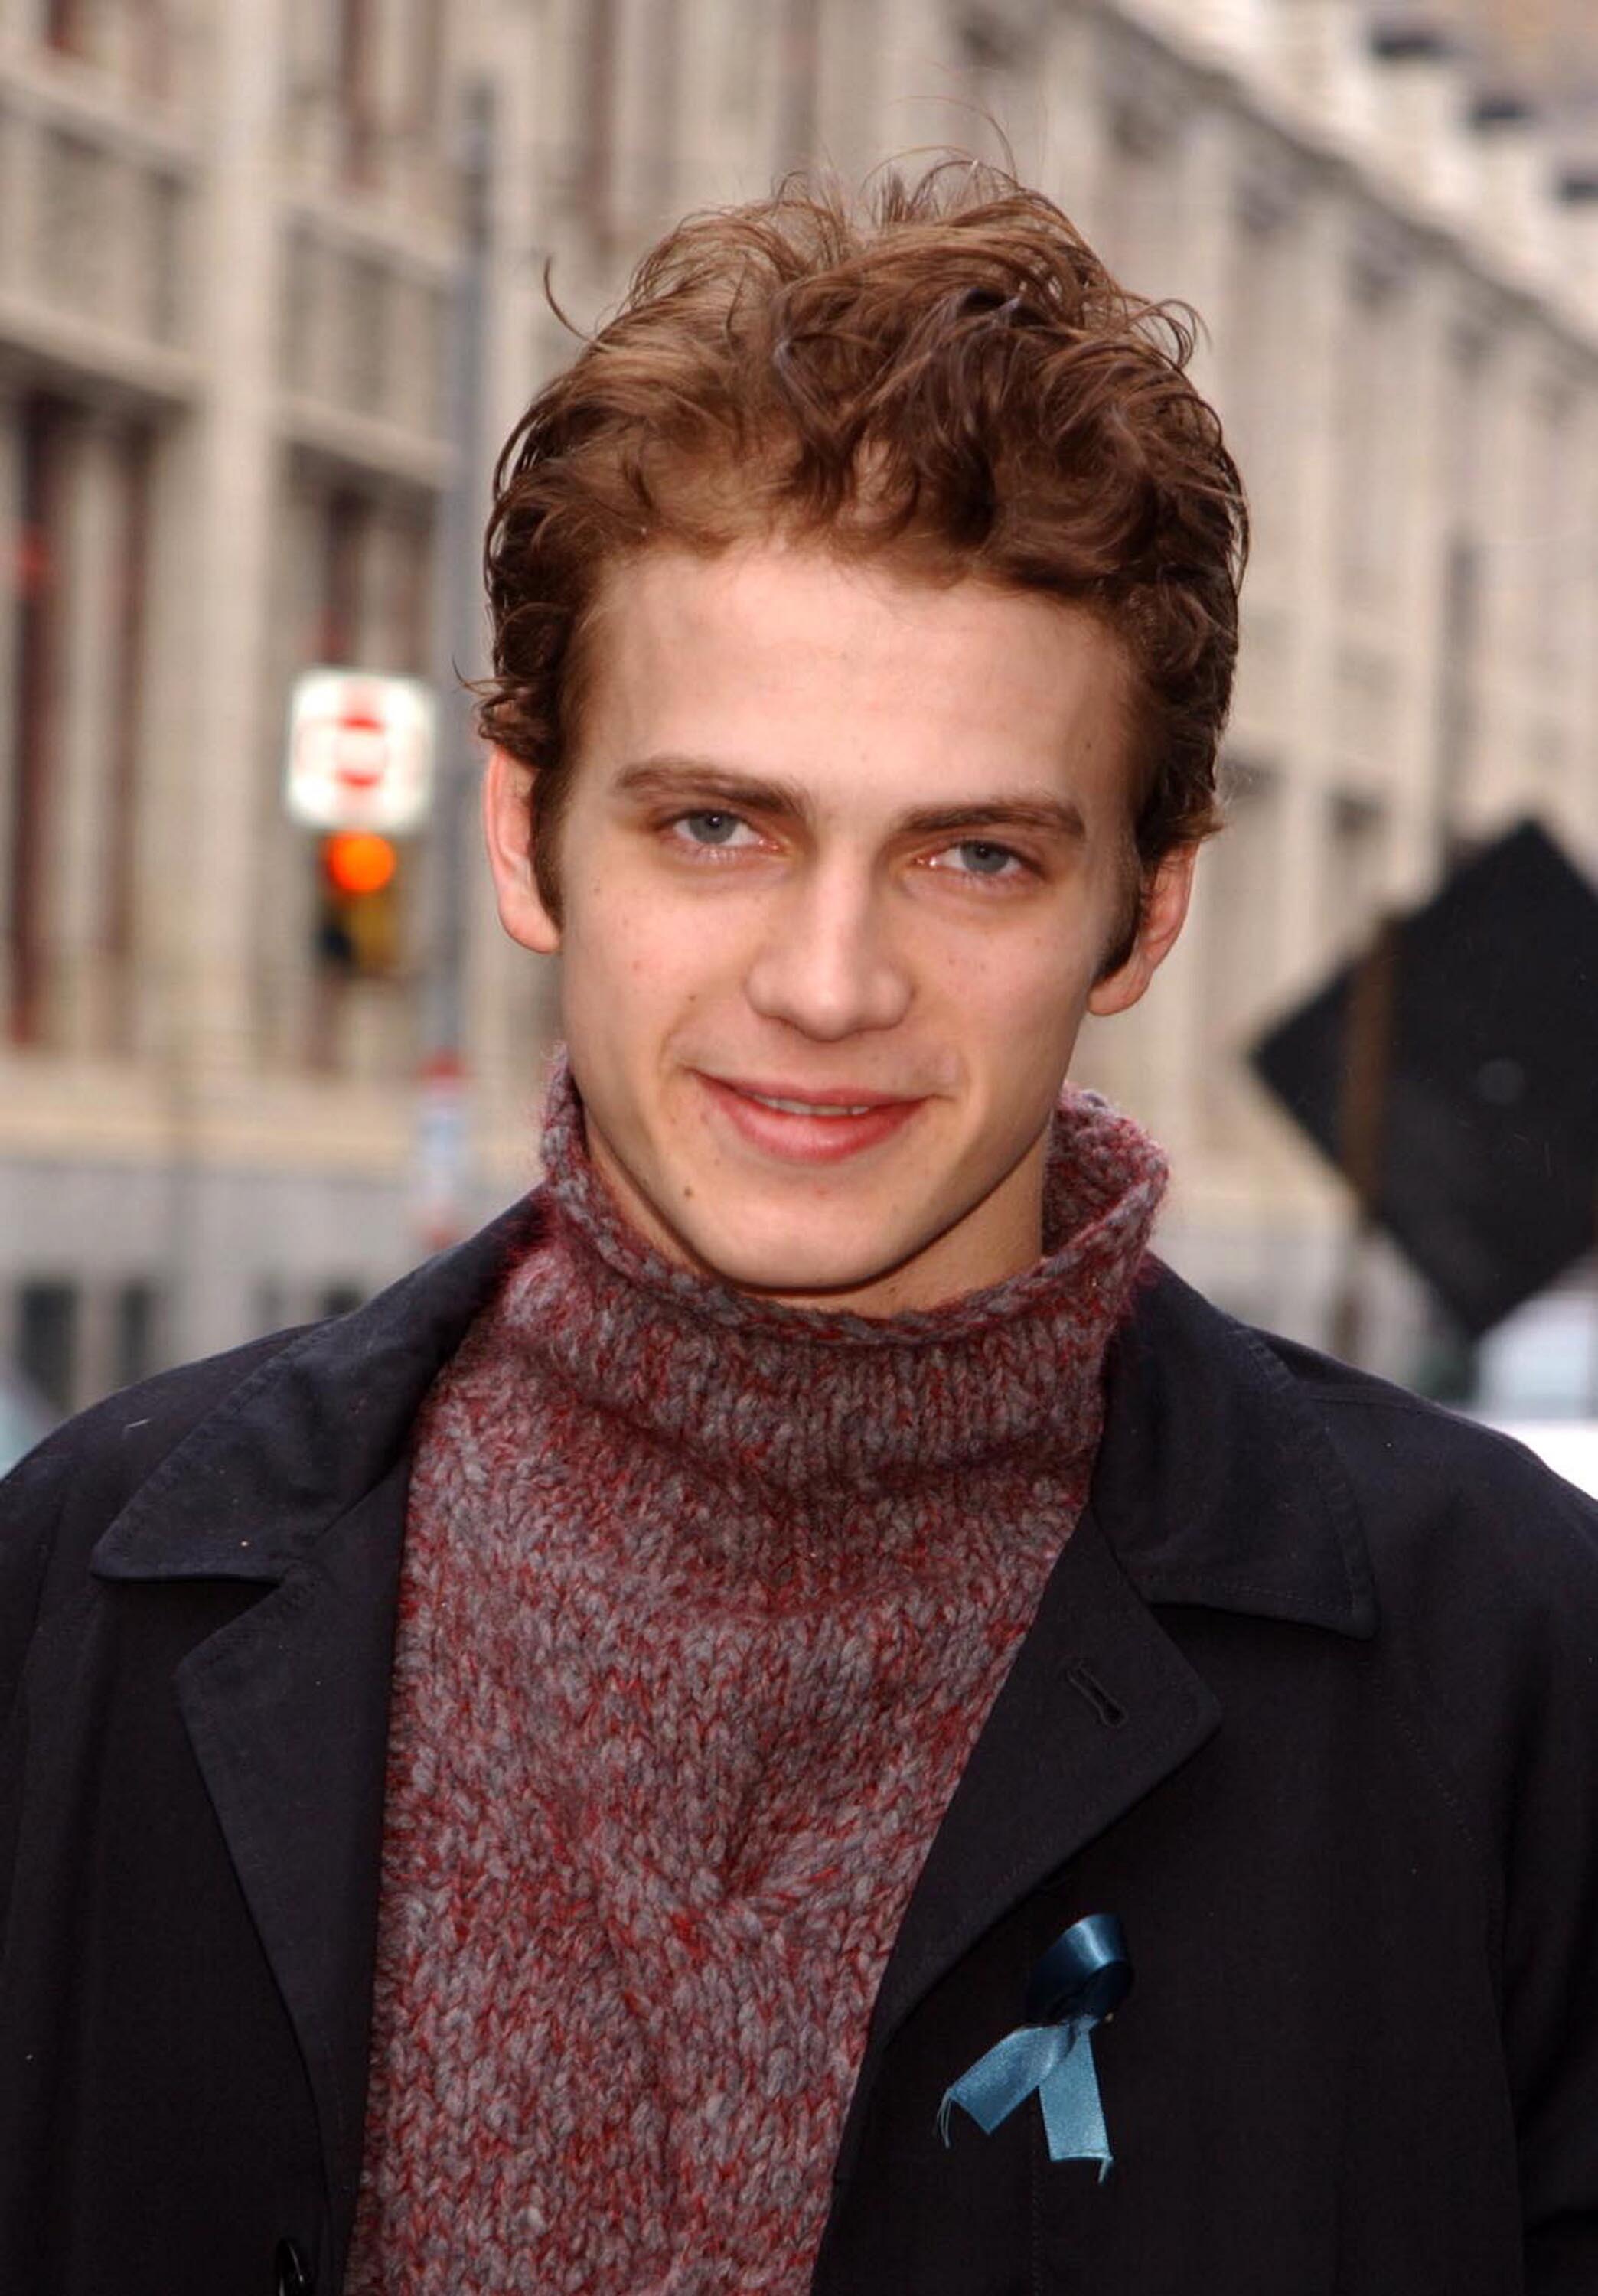 Hayden Christensen at the charity premiere of "Star Wars: Episode II - Attack of the Clones" on May 12, 2002 | Source: Getty Images